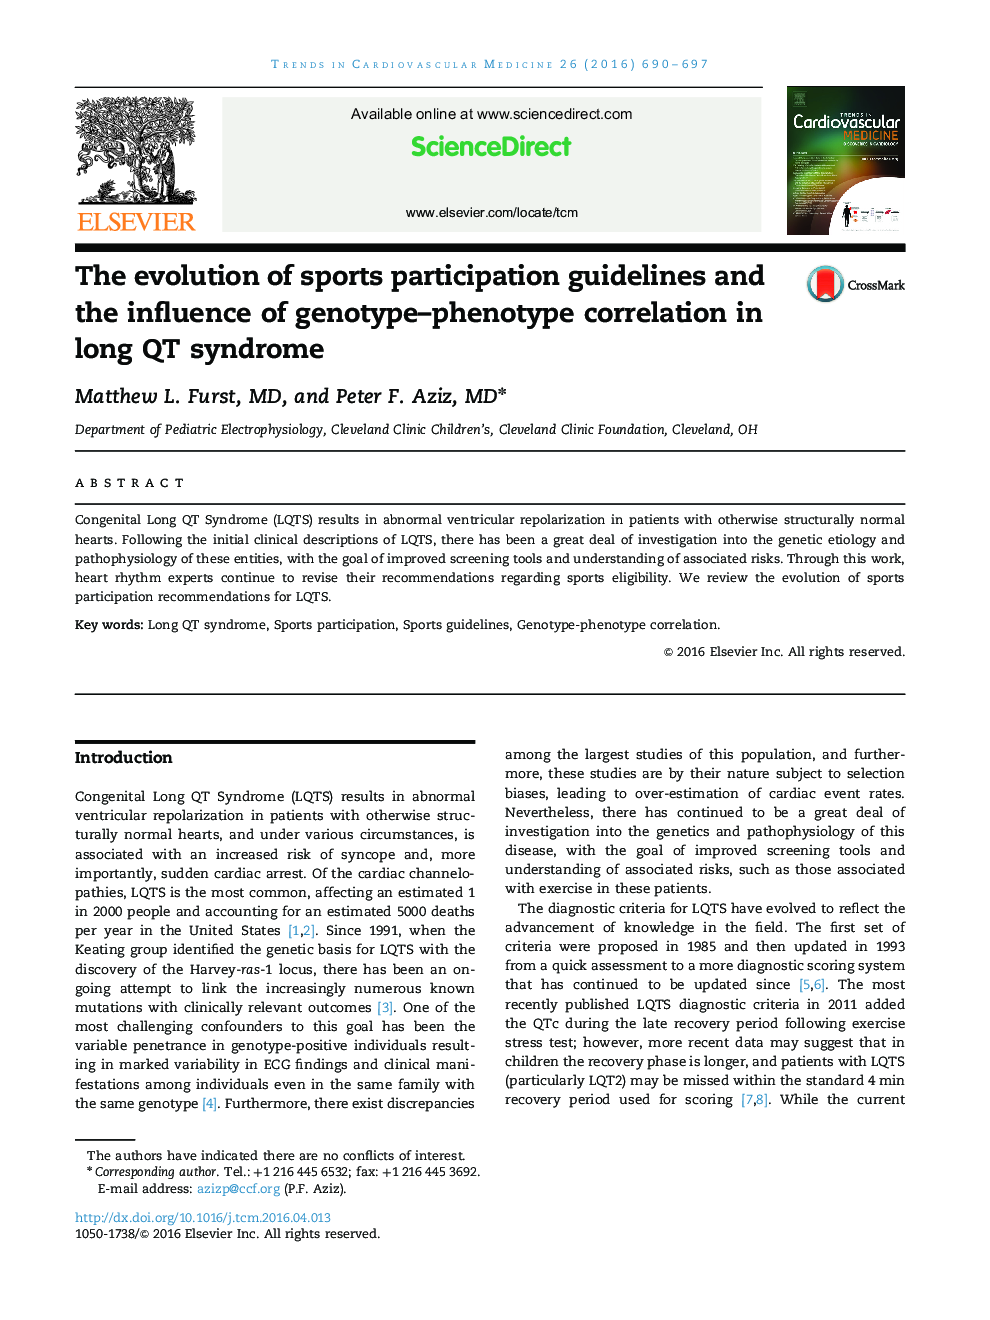 The evolution of sports participation guidelines and the influence of genotype-phenotype correlation in long QT syndrome